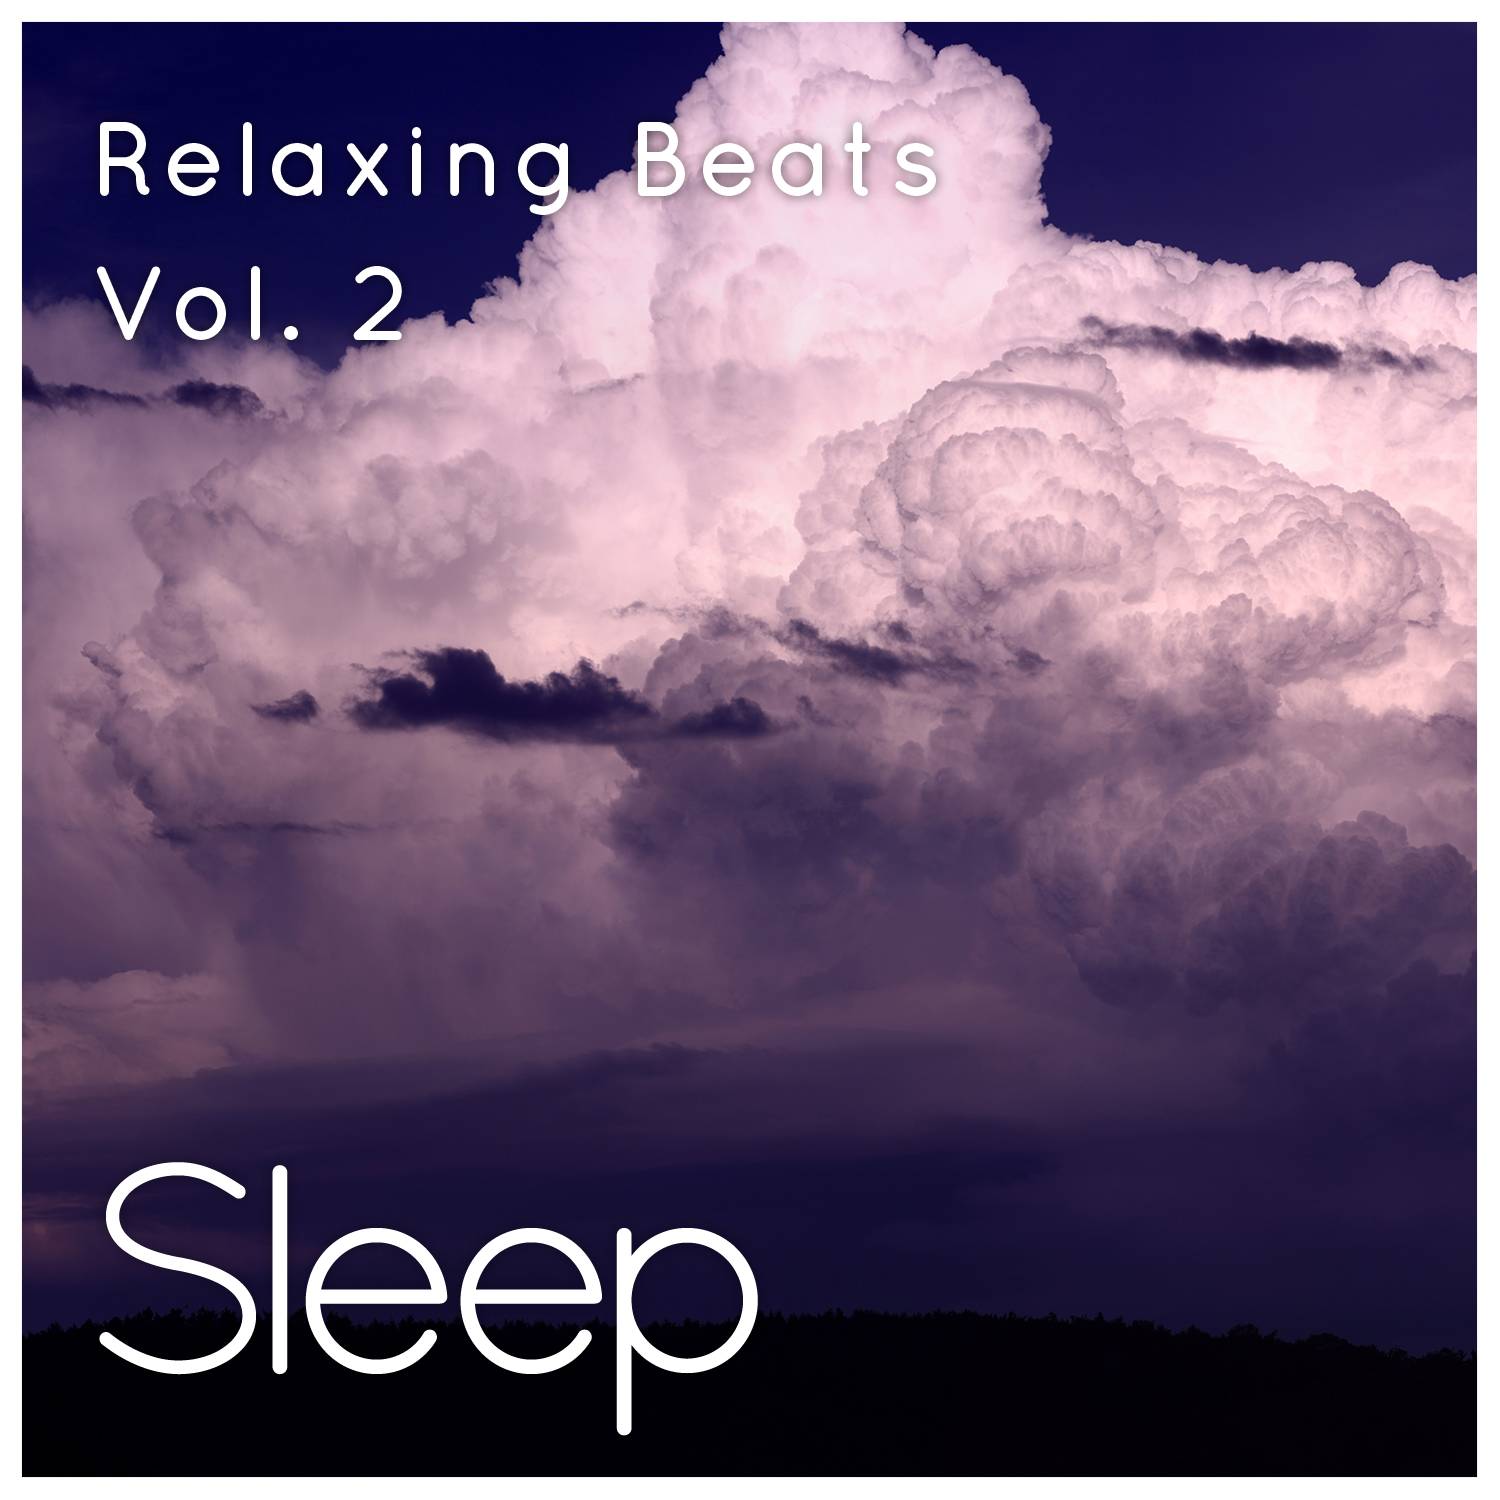 Relaxing Ambient Sleep Sounds, Pt. 6